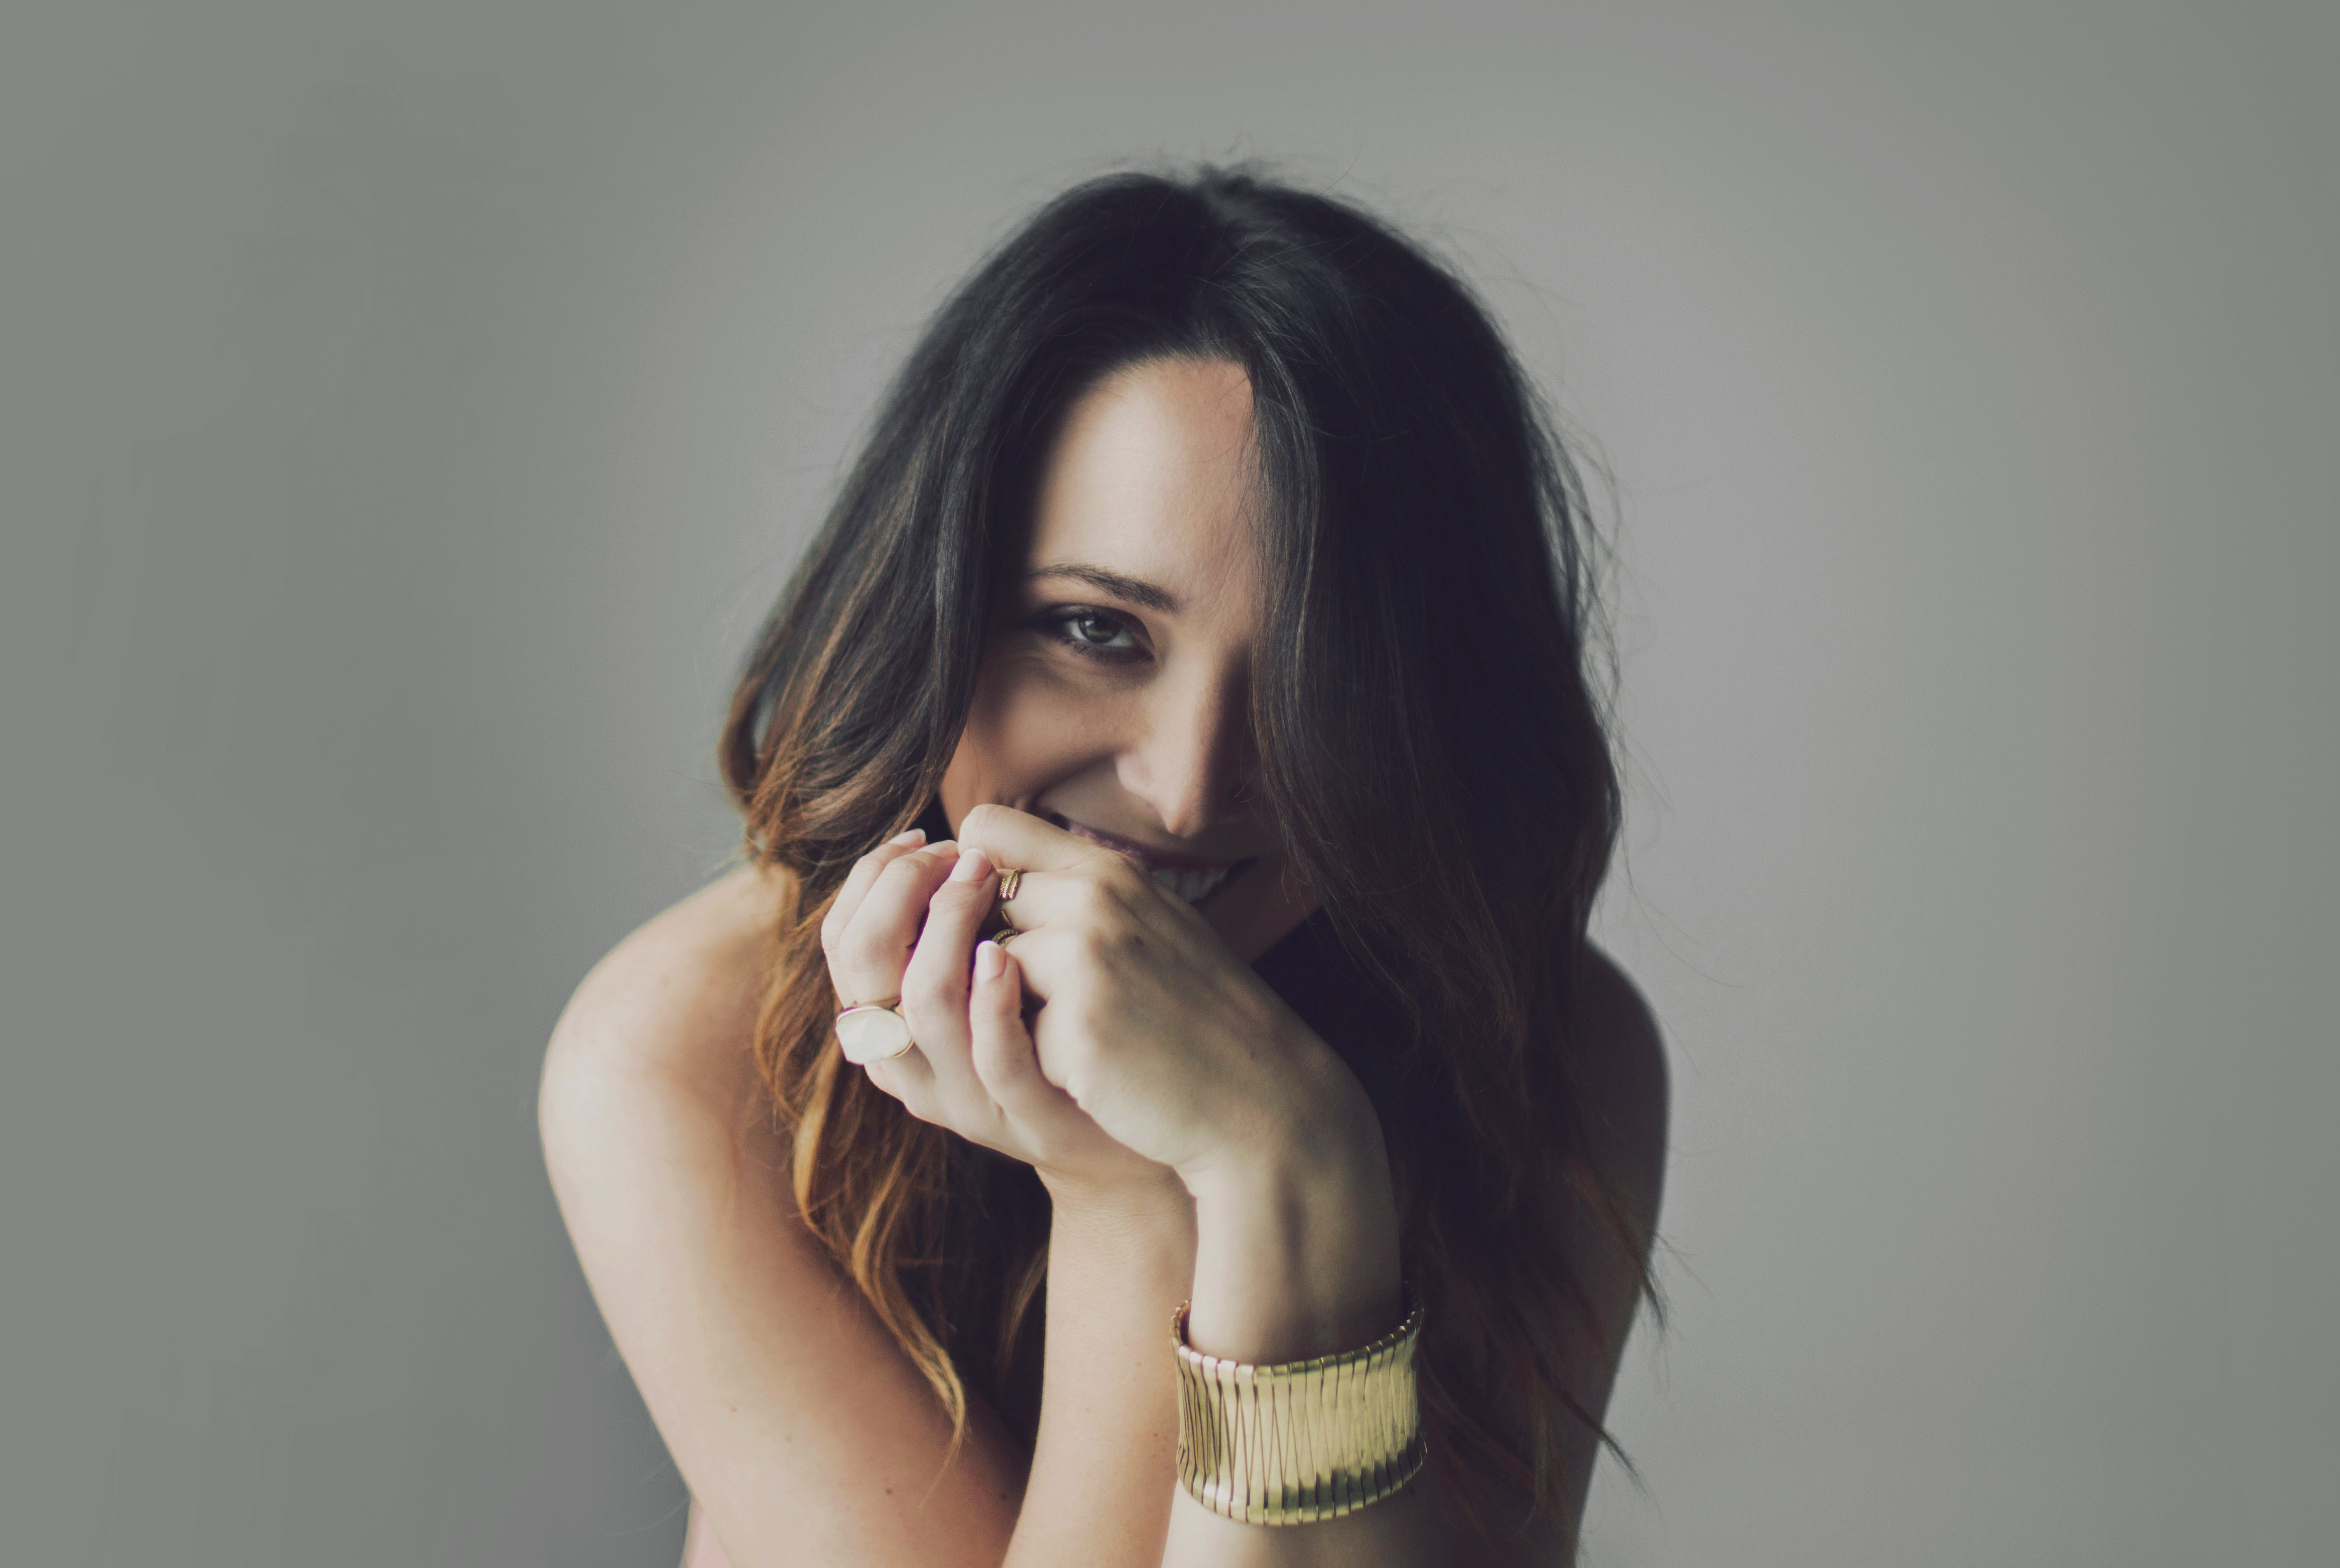 Song Premiere: Holley Maher, “Whispered Words”